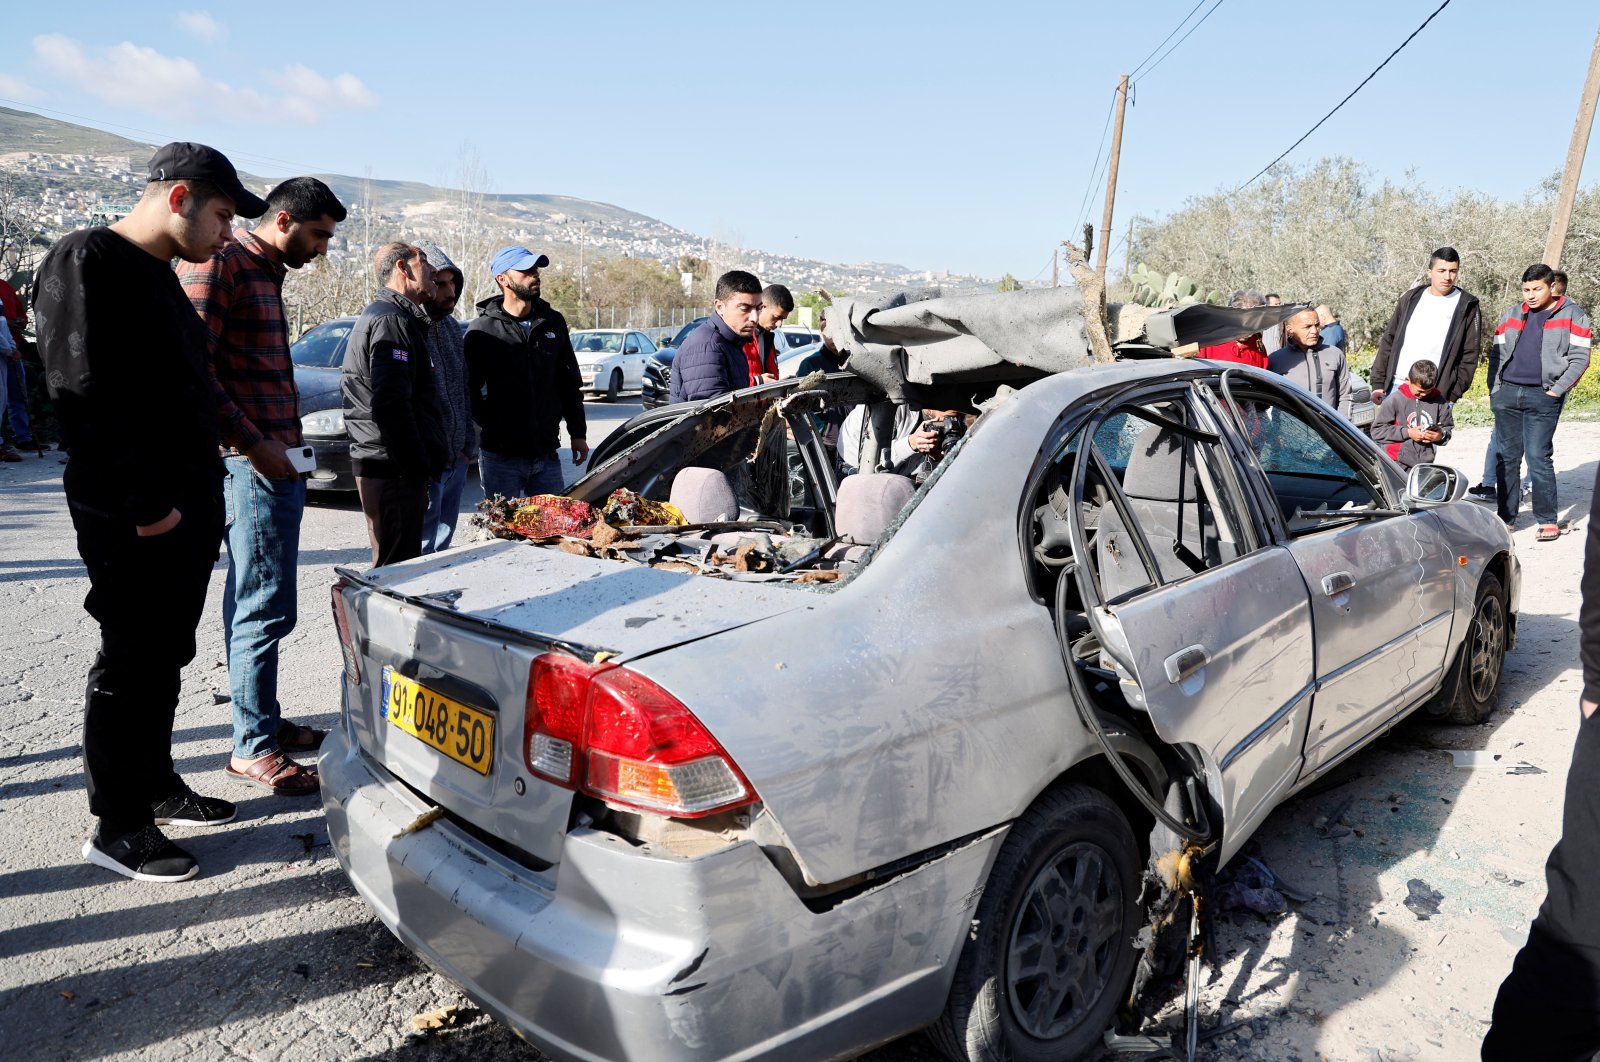 People look at a damaged car where three Palestinian men were killed during an Israeli operation, Jenin, Israeli-occupied West Bank, March 9, 2023. (Reuters Photo)